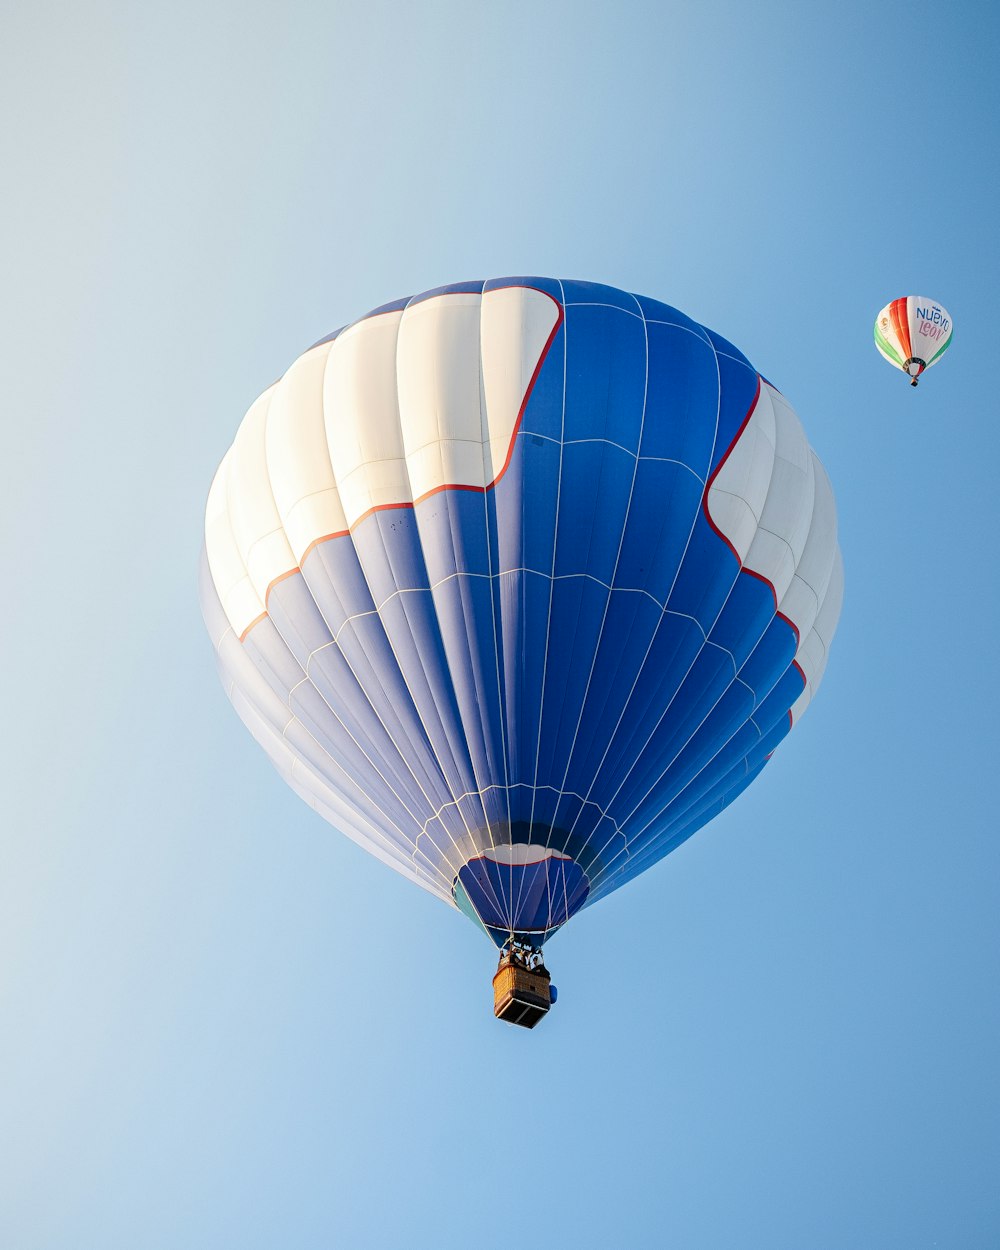 a blue and white hot air balloon and a red and white hot air balloon